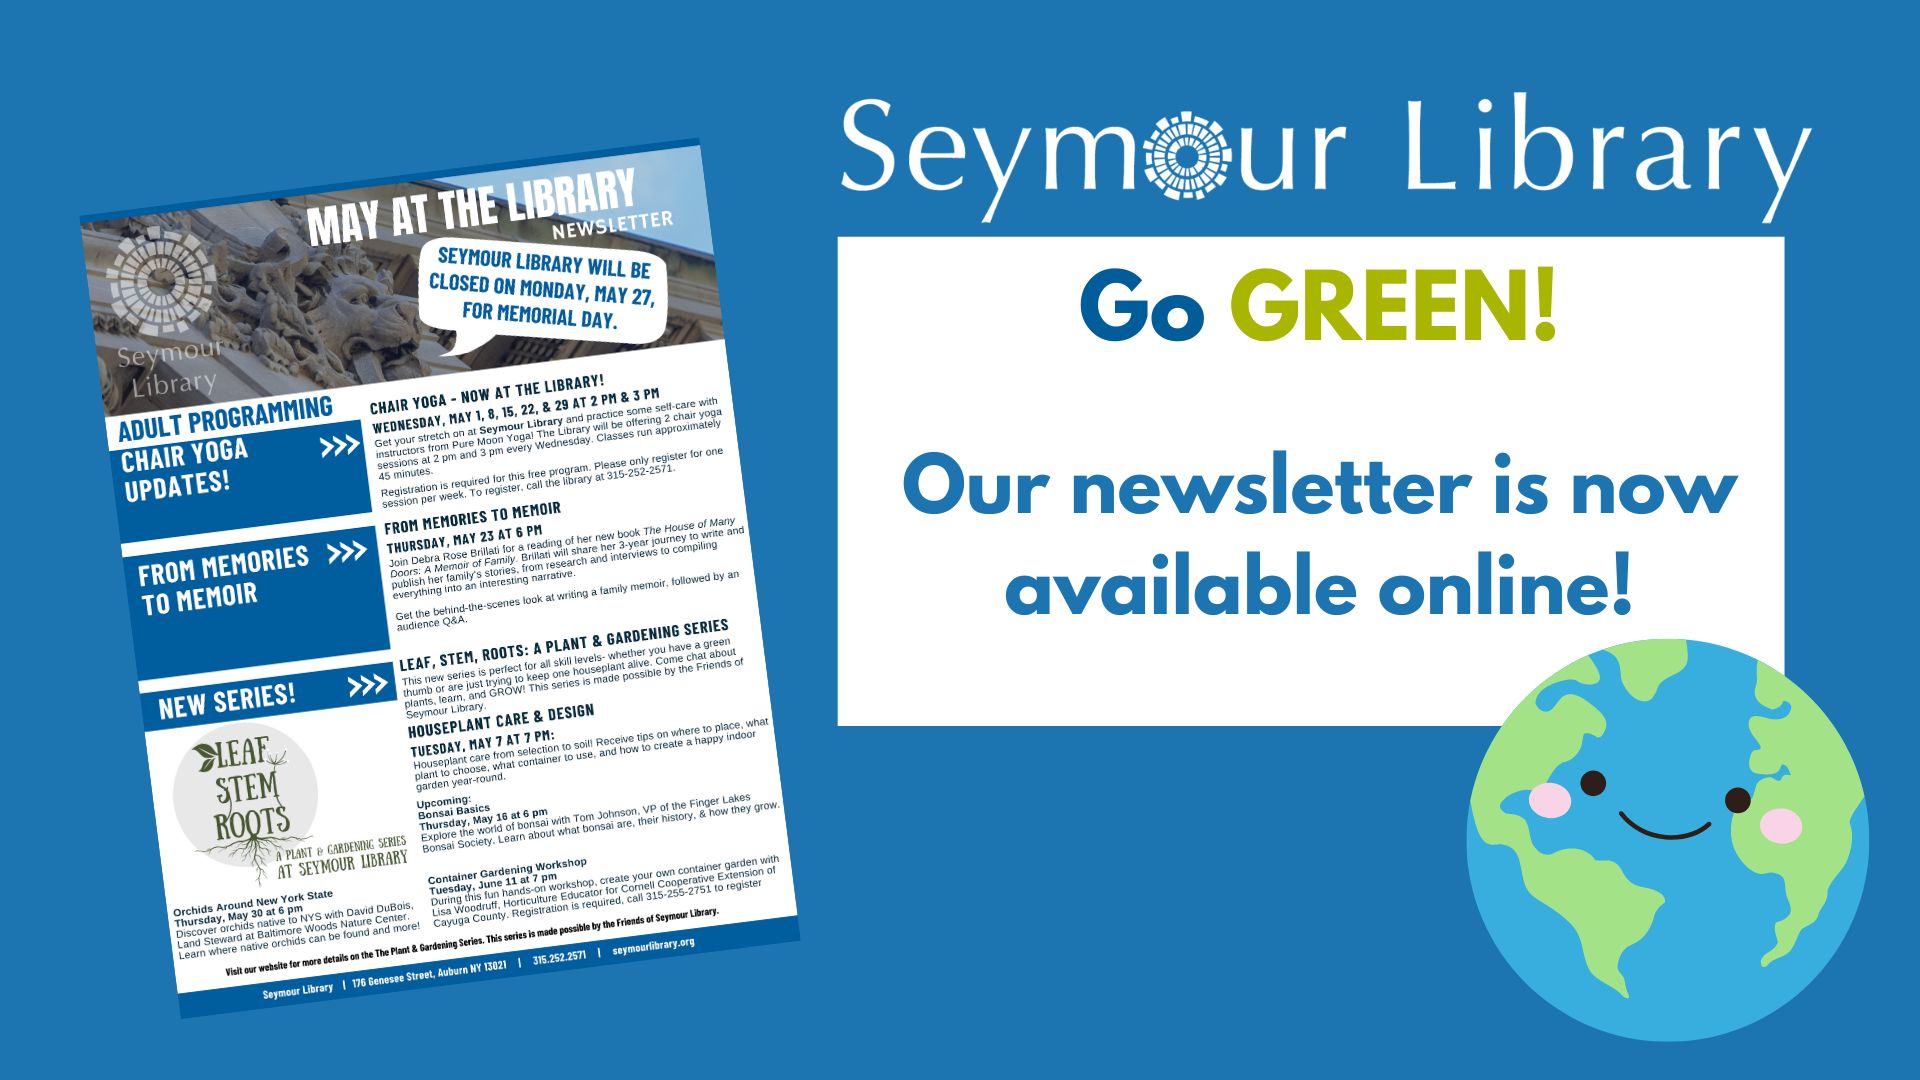 Go Green! Our newsletter is now available online!